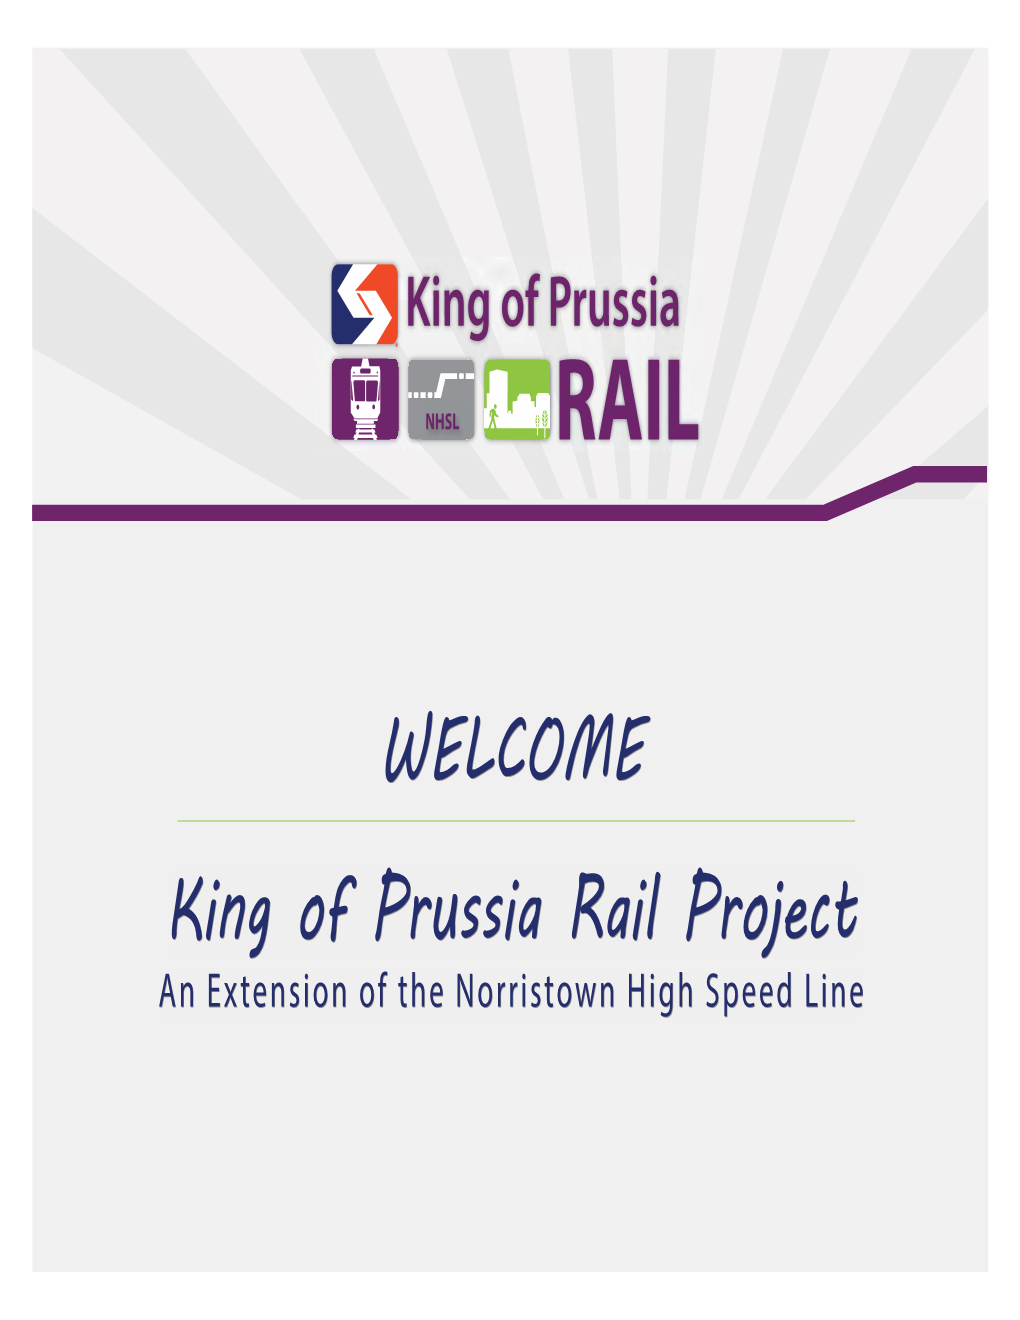 King of Prussia Rail Project an Extension of the Norristown High Speed Line